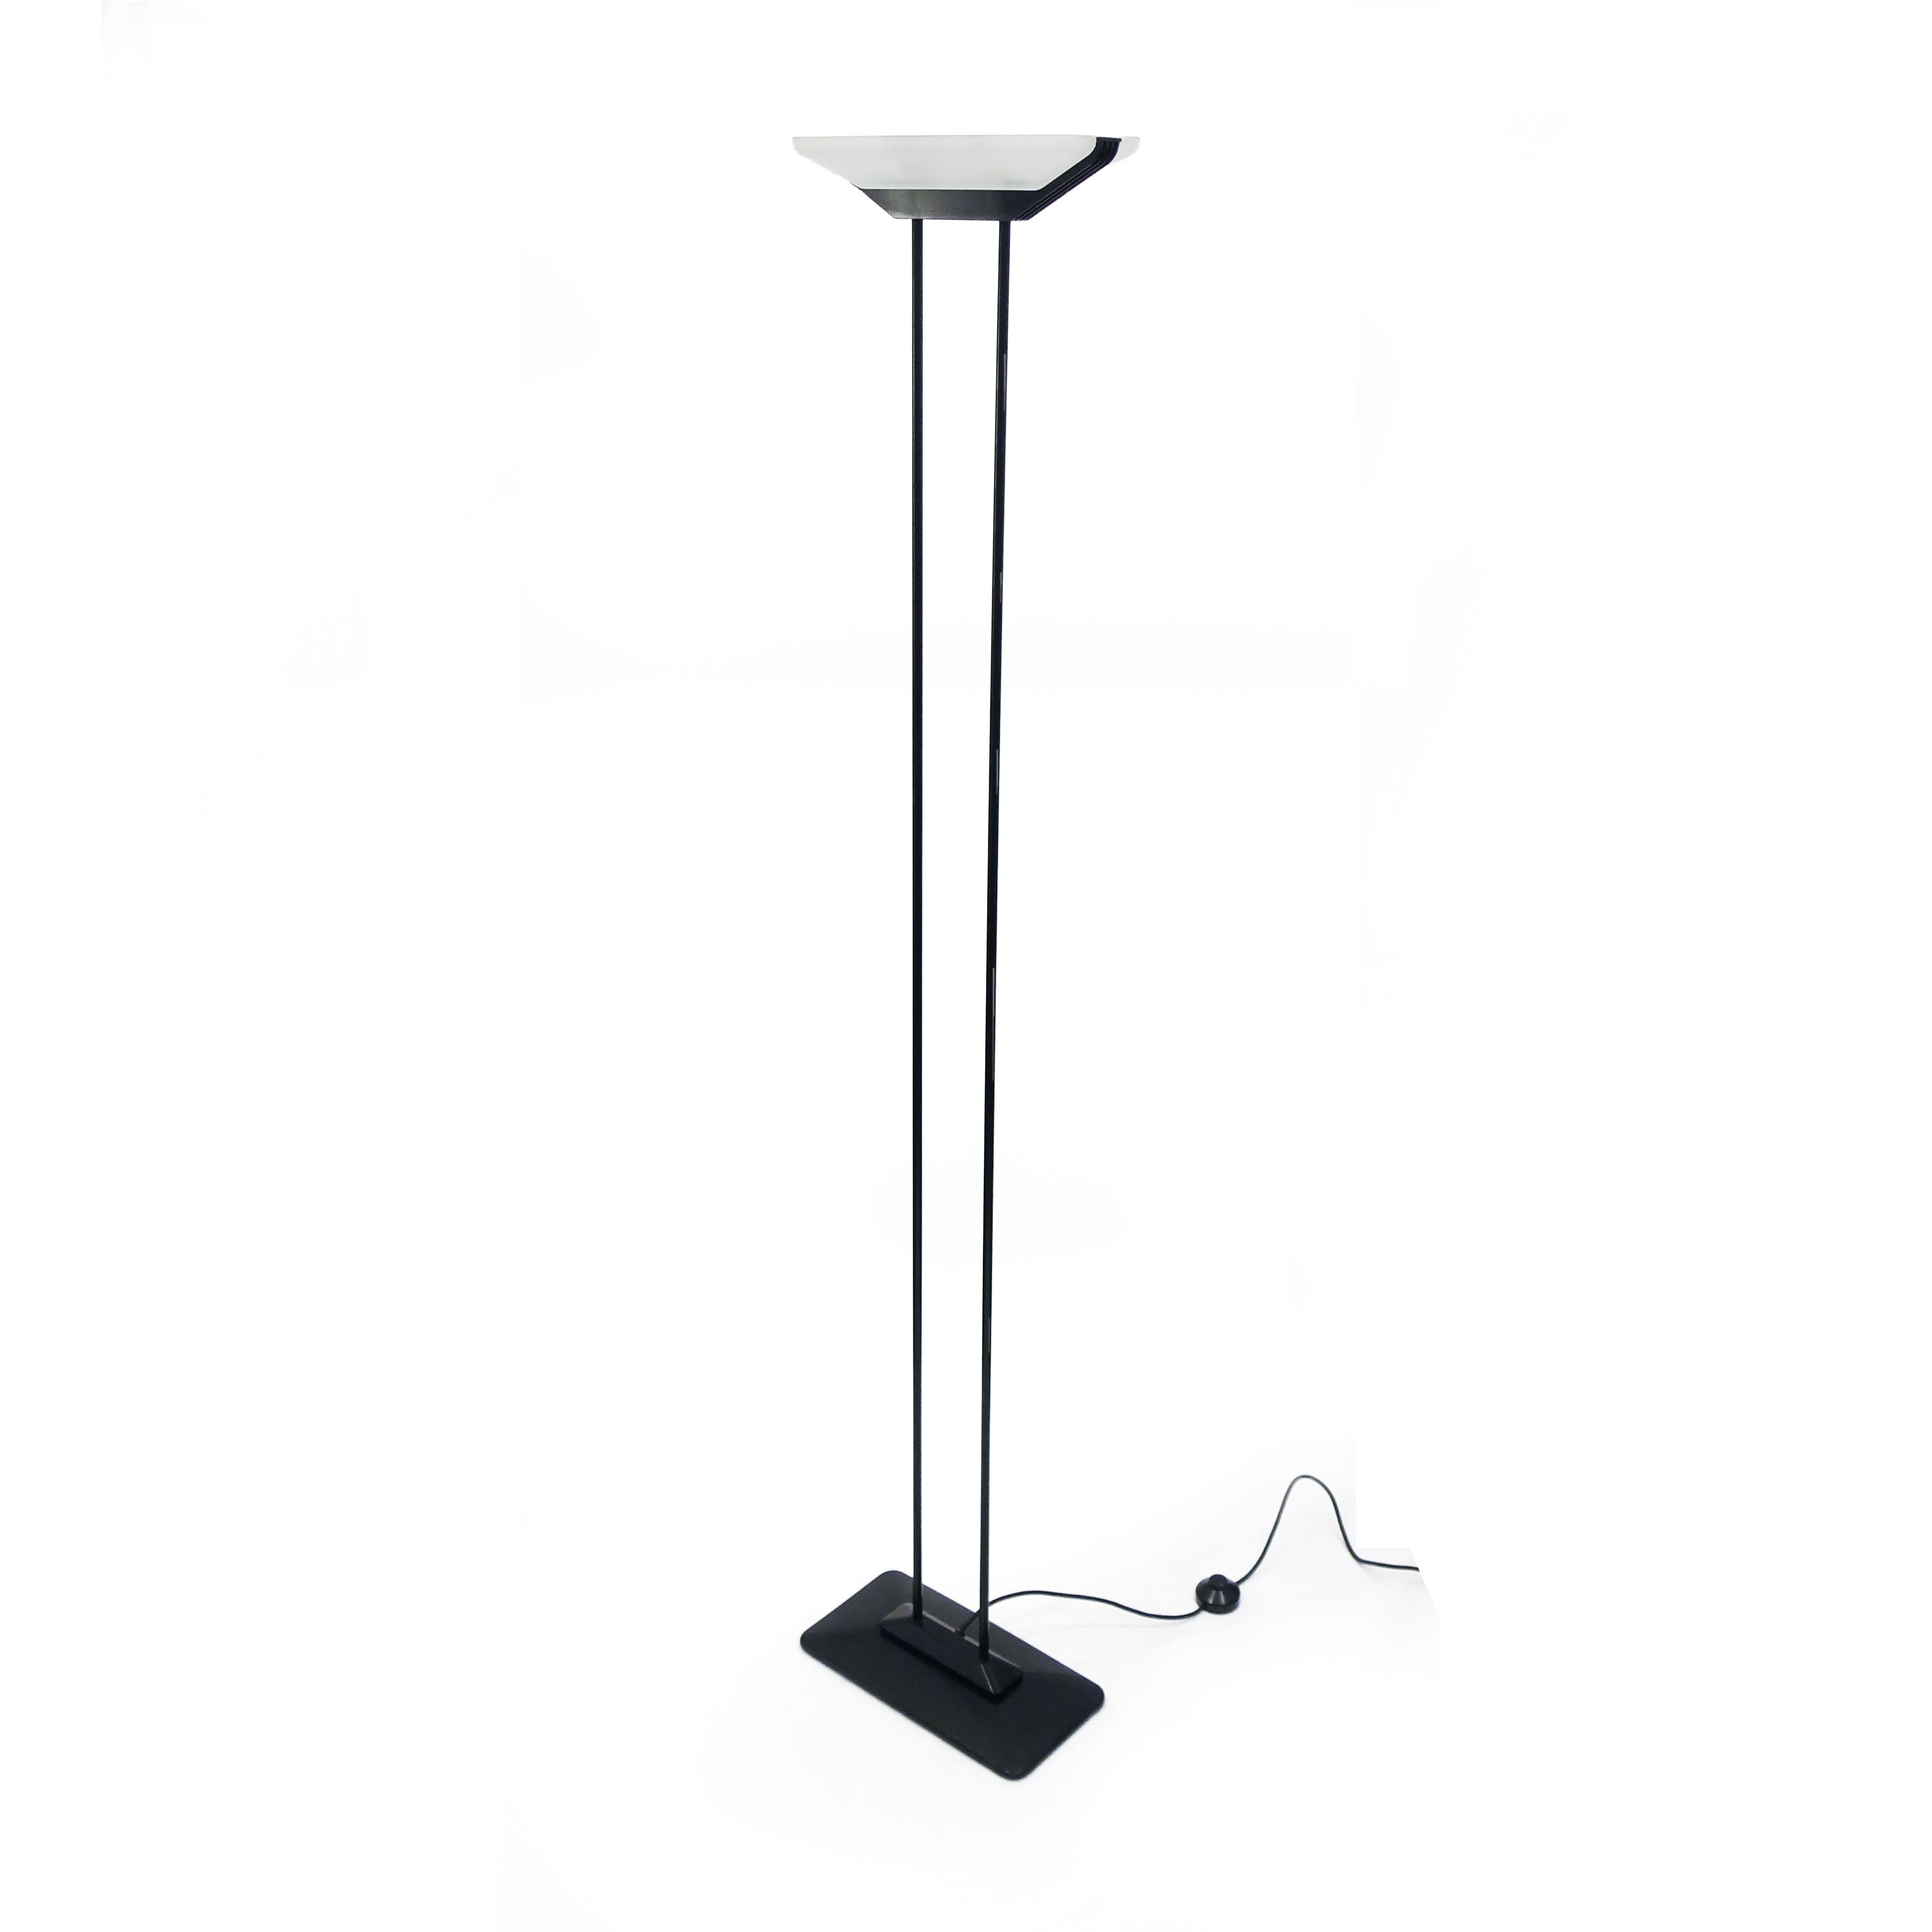 A great 1980s postmodern floor lamp by Tensor in black enameled metal. With heavy metal base and two metal columns that support a rectangular glass shade, the lamp's bulb is nestled inside the shade.

In good vintage condition with wear consistent